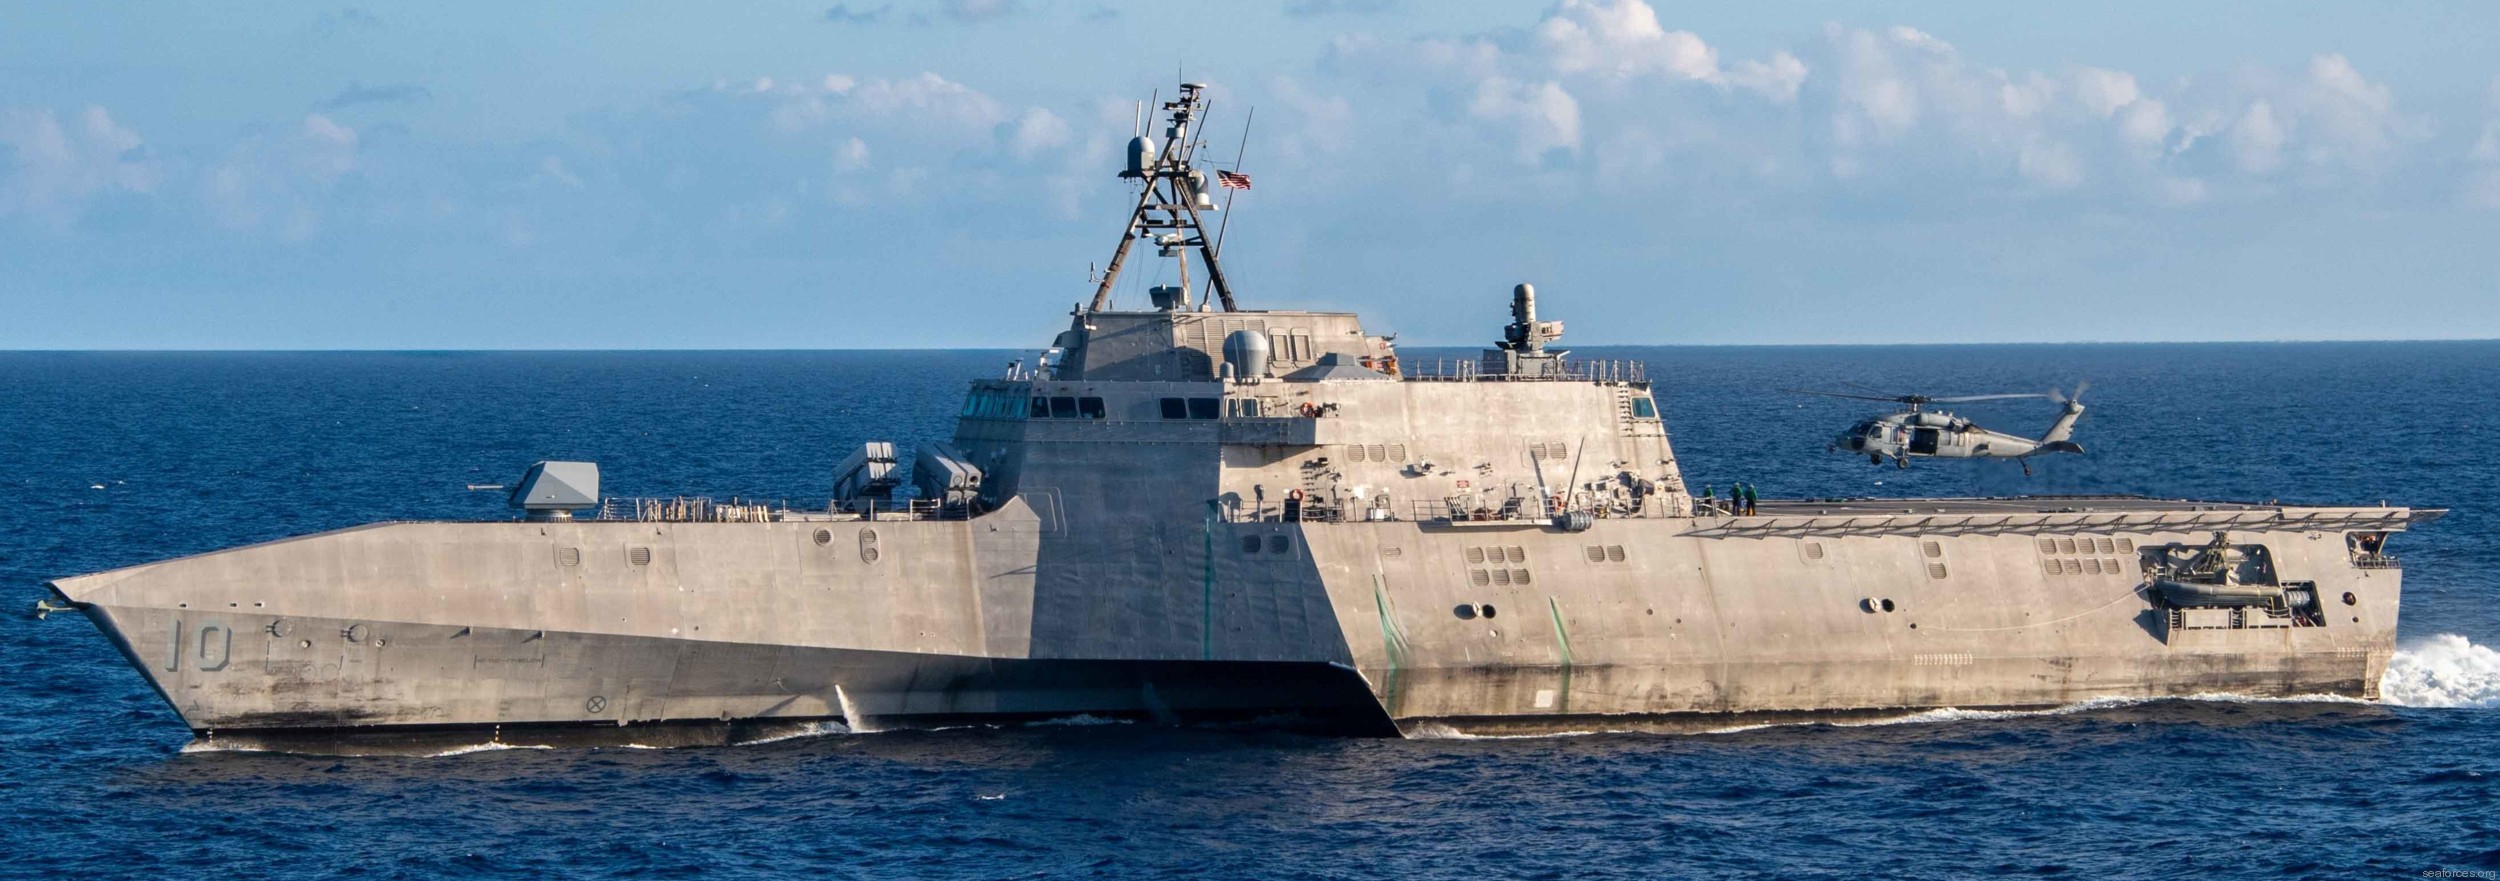 lcs-10 uss gabrielle giffords littoral combat ship independence class us navy 42 mh-60s seahawk